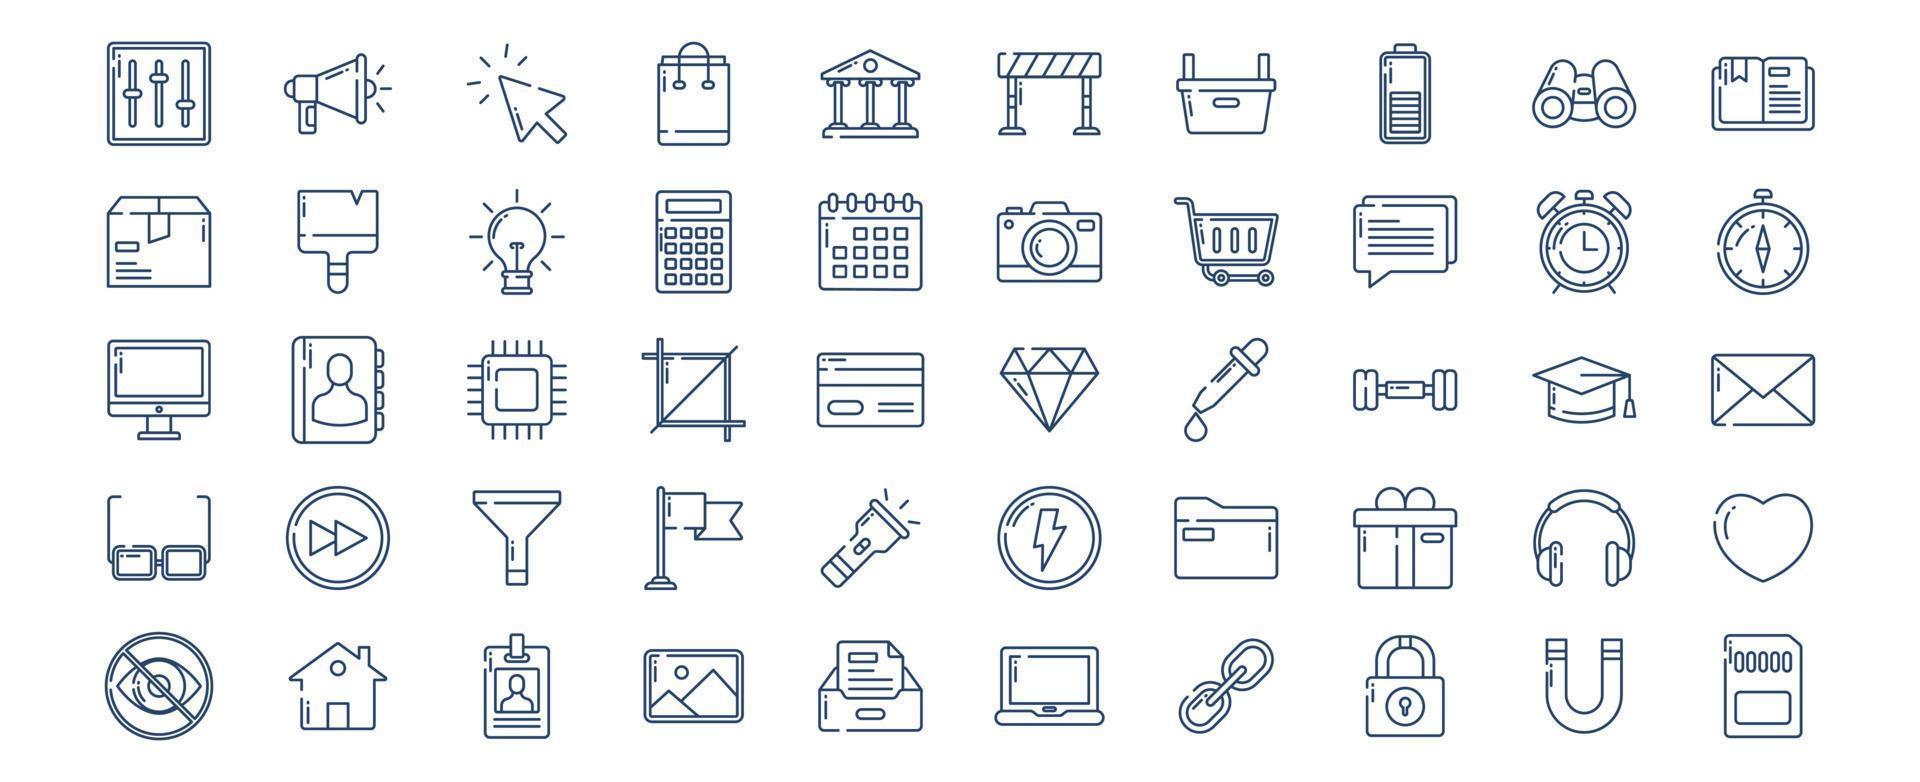 Collection of icons related to Ui and Interface essential, including icons like Announcement, Cart, Camera, Clock and more. vector illustrations, Pixel Perfect set